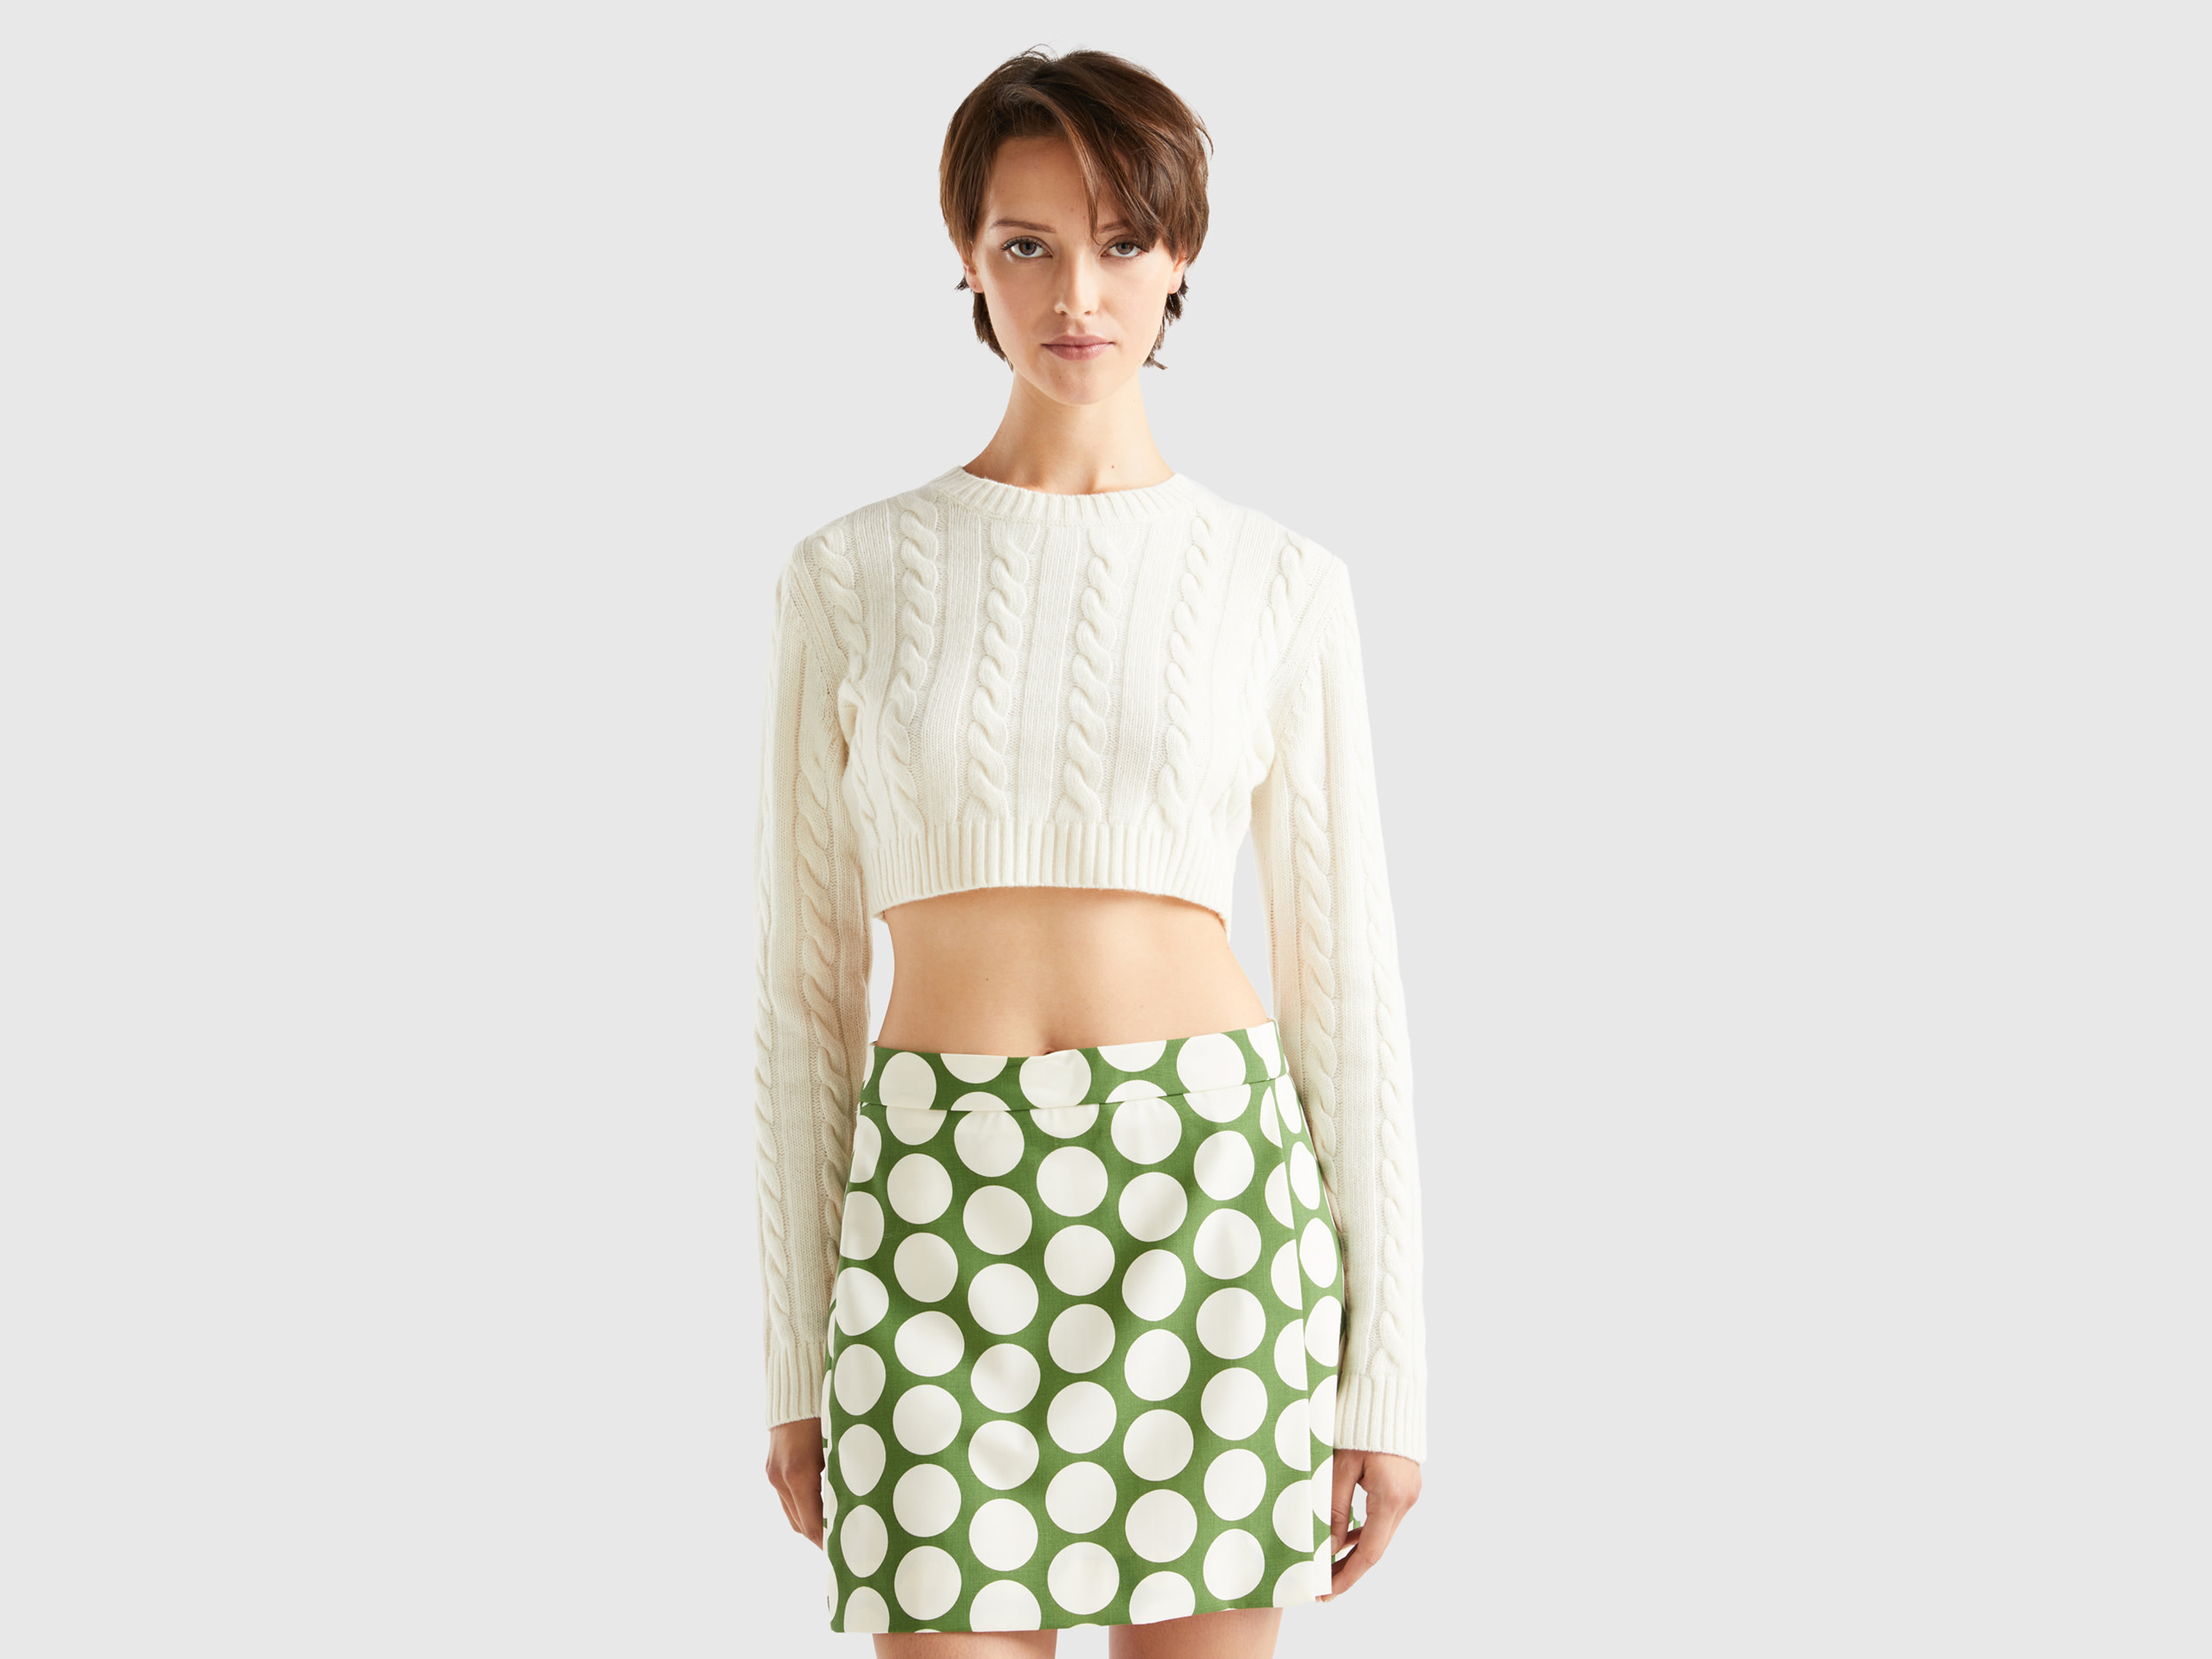 Benetton, Cropped Sweater With Cables, size M, White, Women